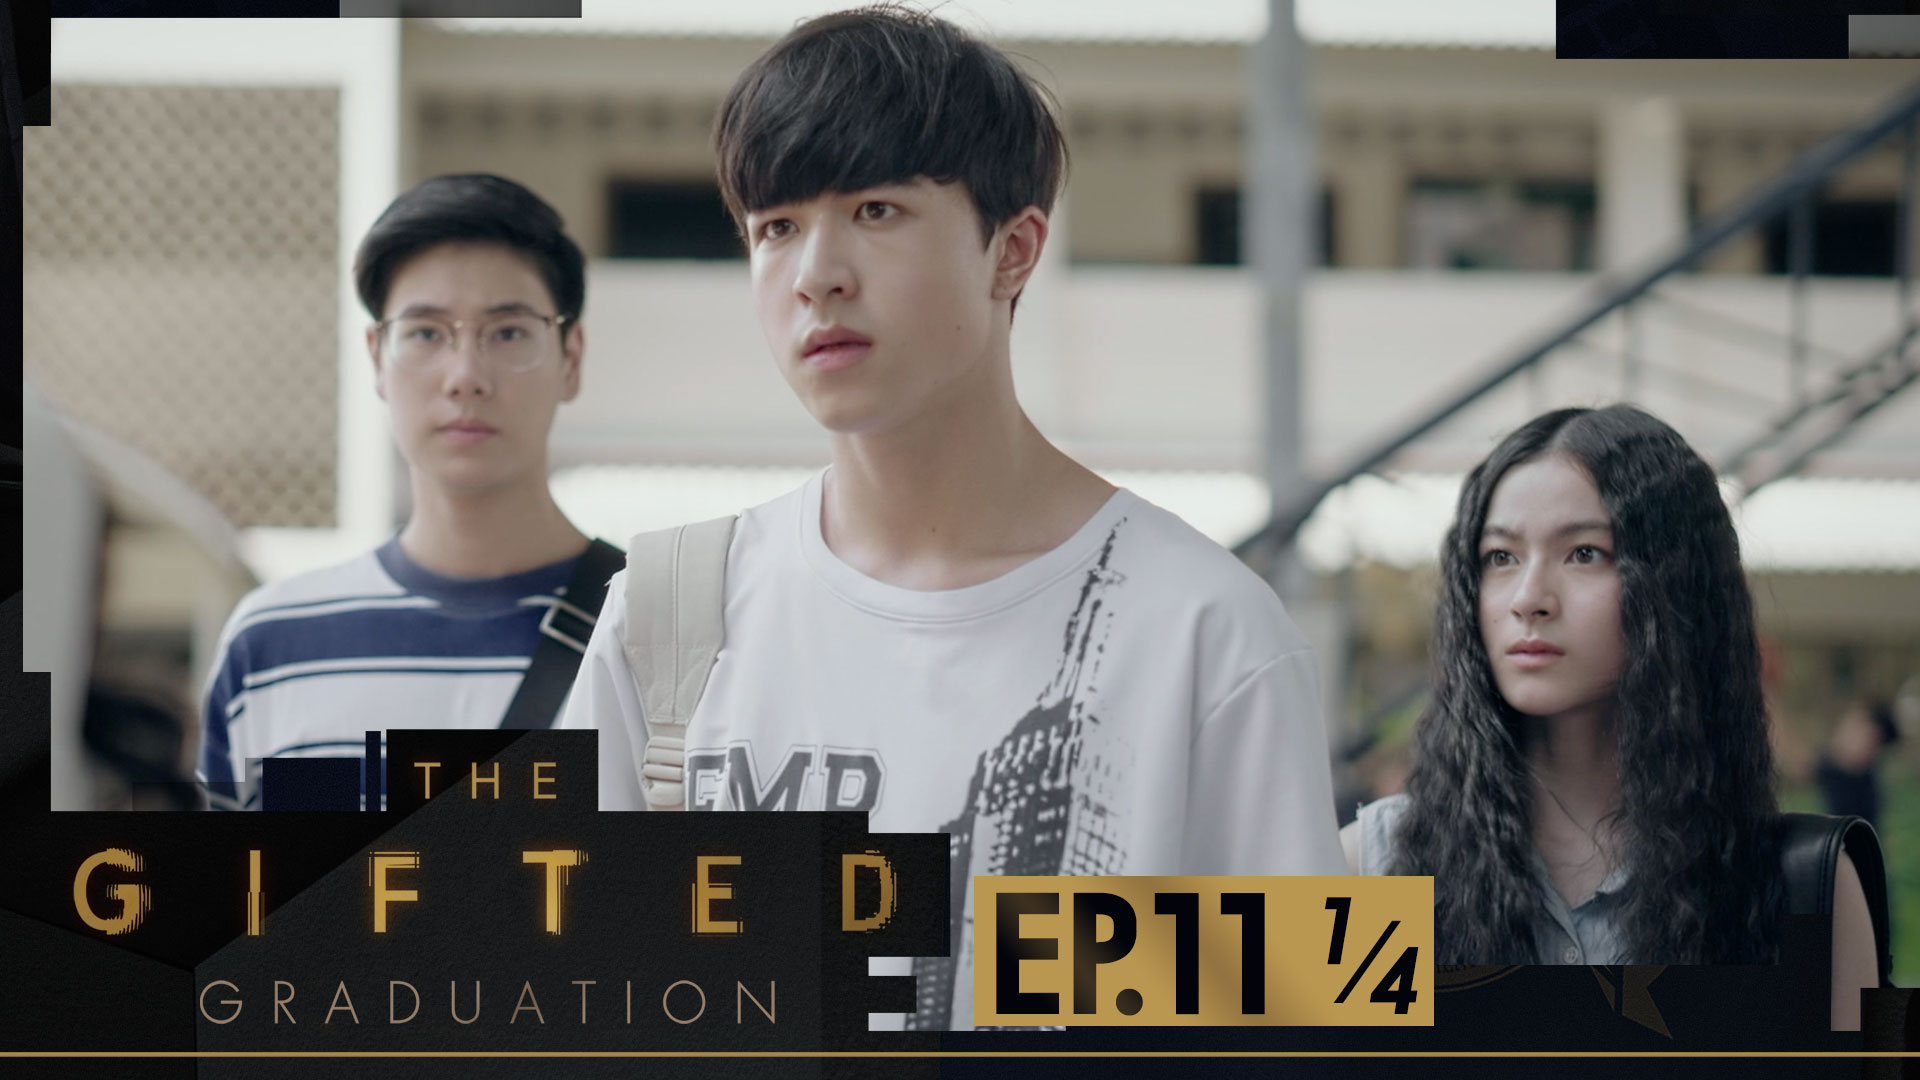 The Gifted Graduation EP.11 [1/4]